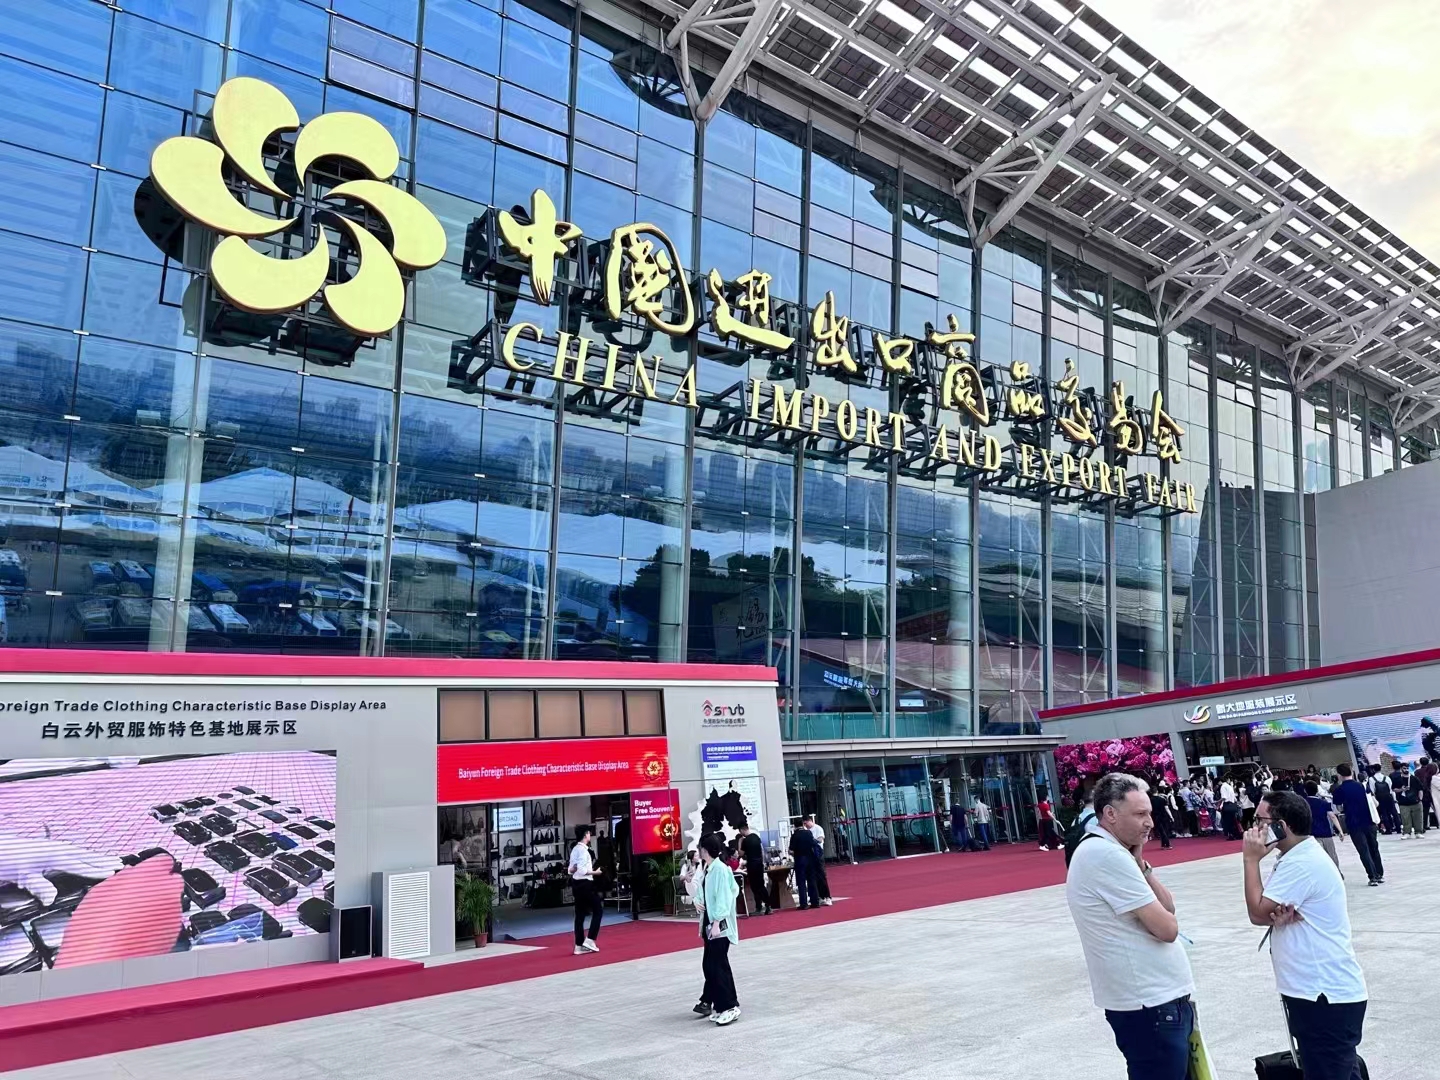 High-Fives and Business Cards Galore – Runtong Rocks the Canton Fair!